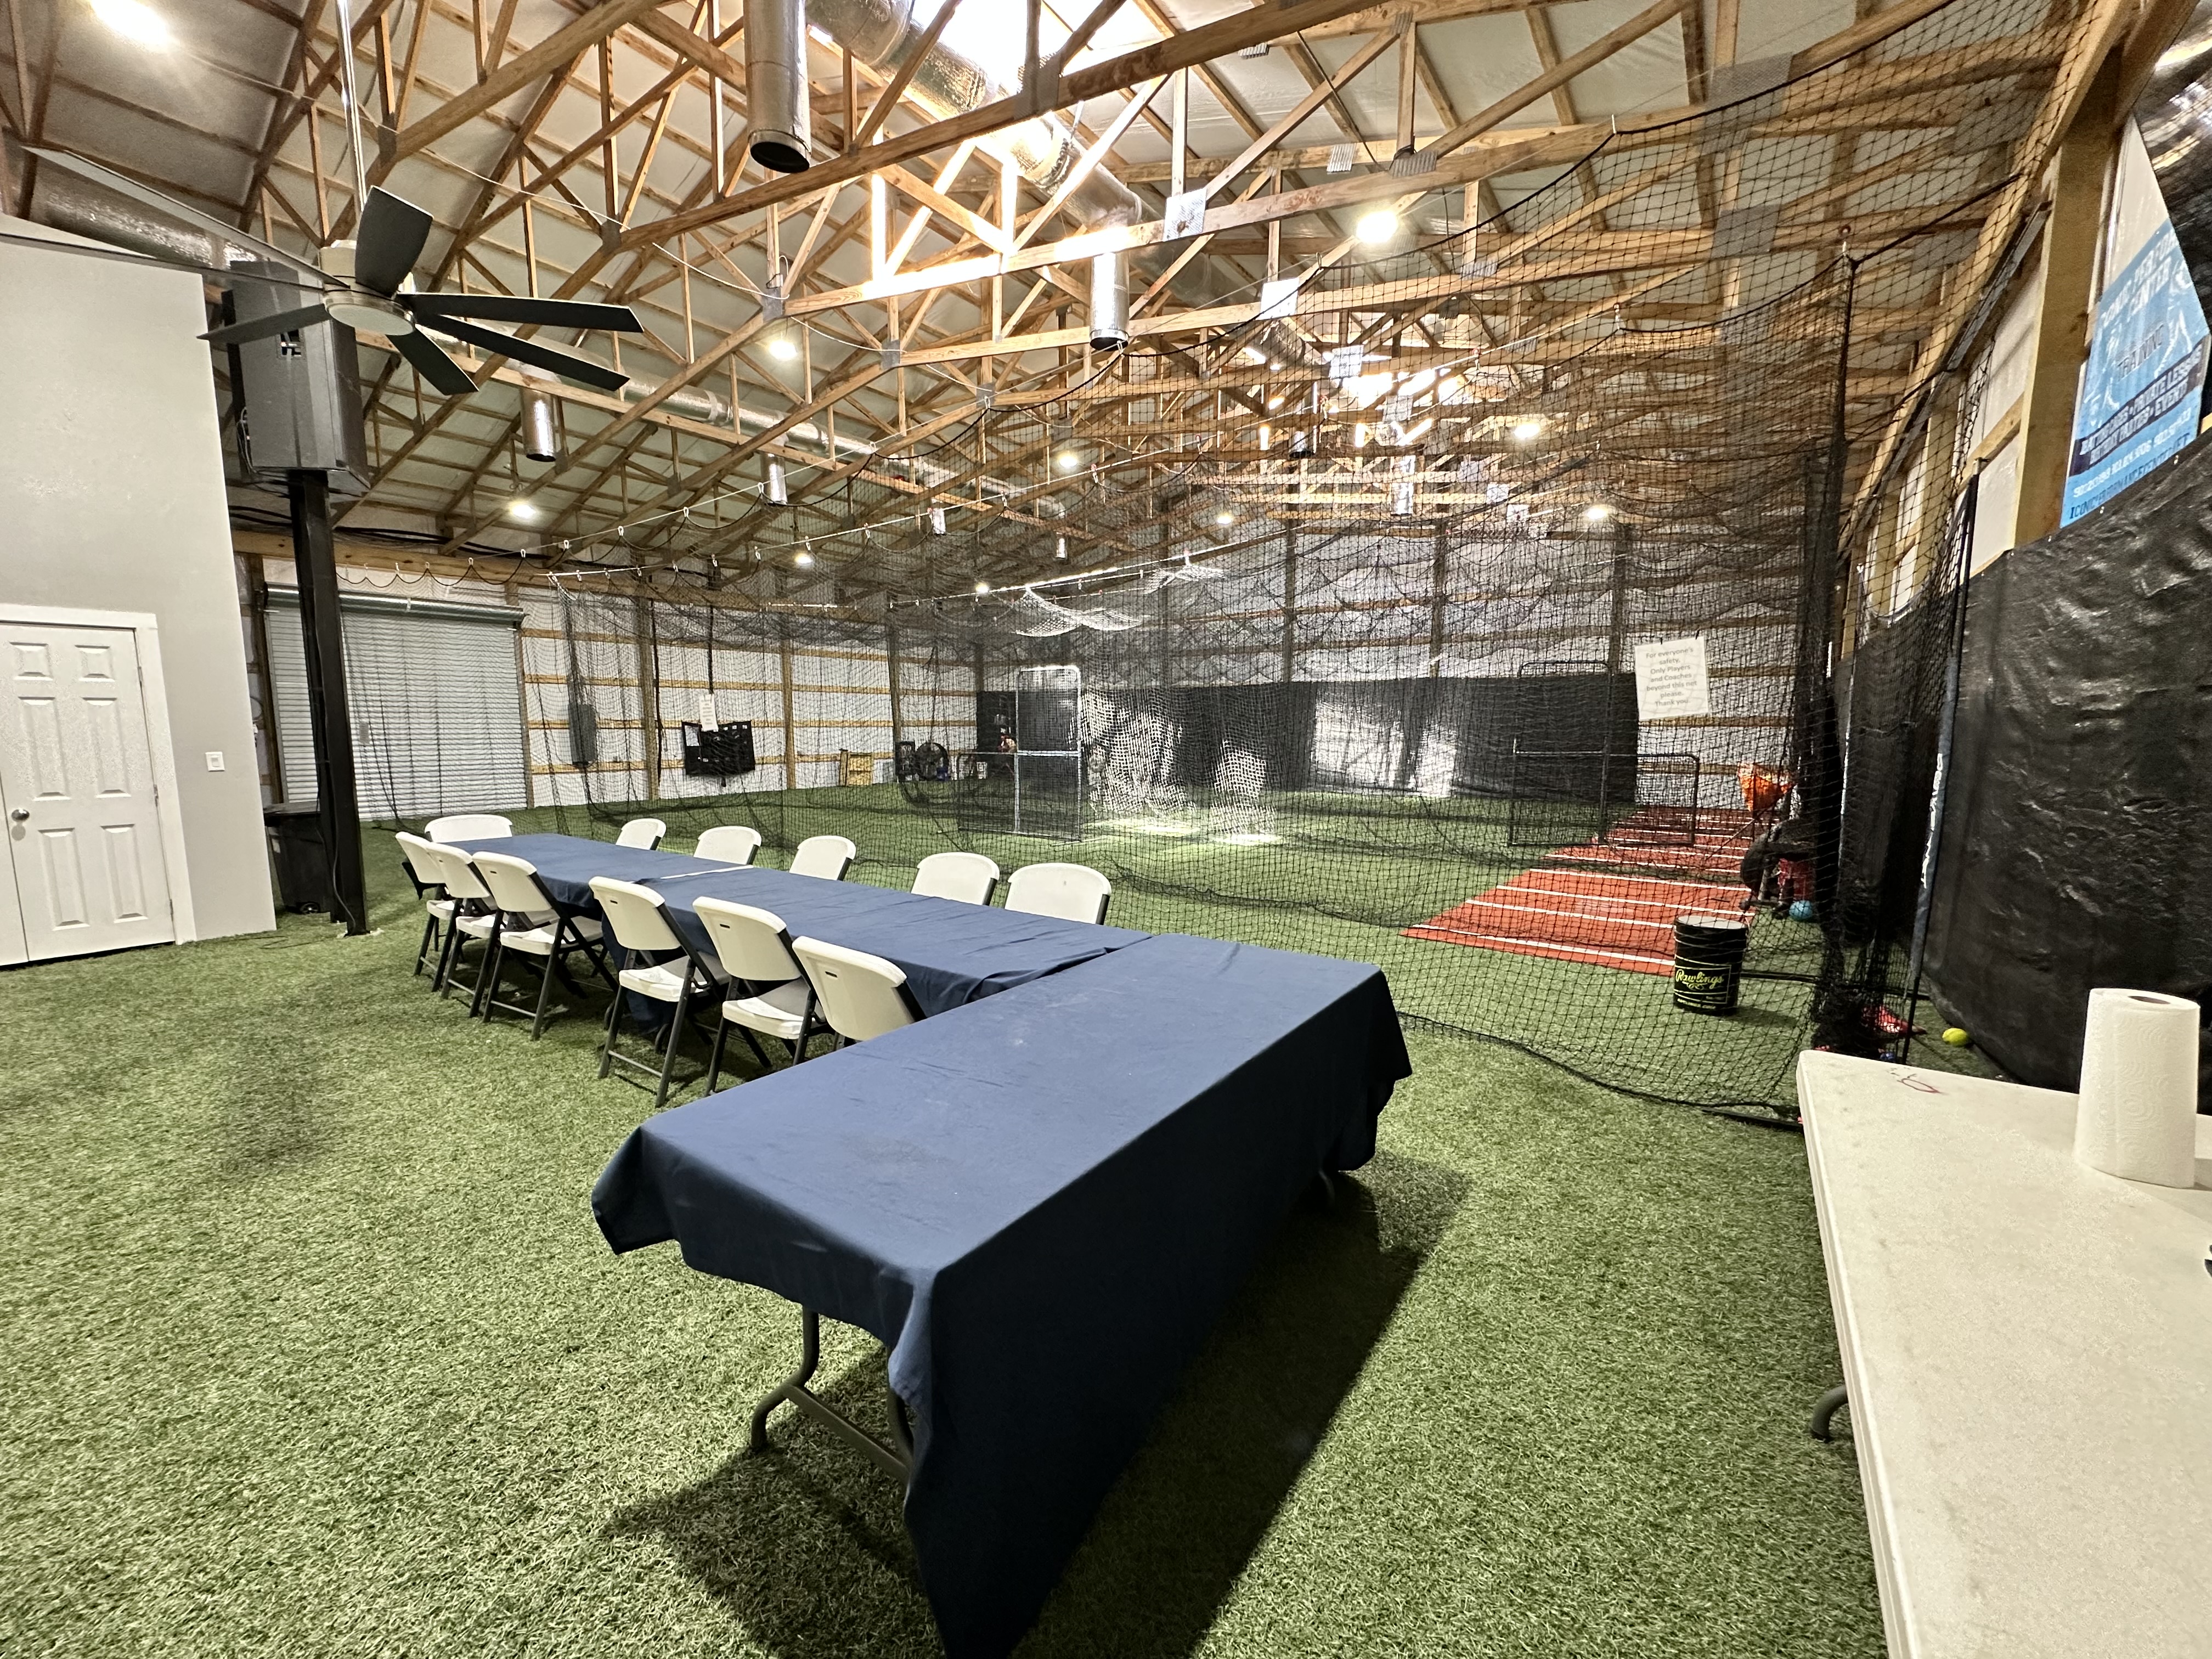 Large climate controlled warehouse space. Used currently as a batting cage/training facility. 